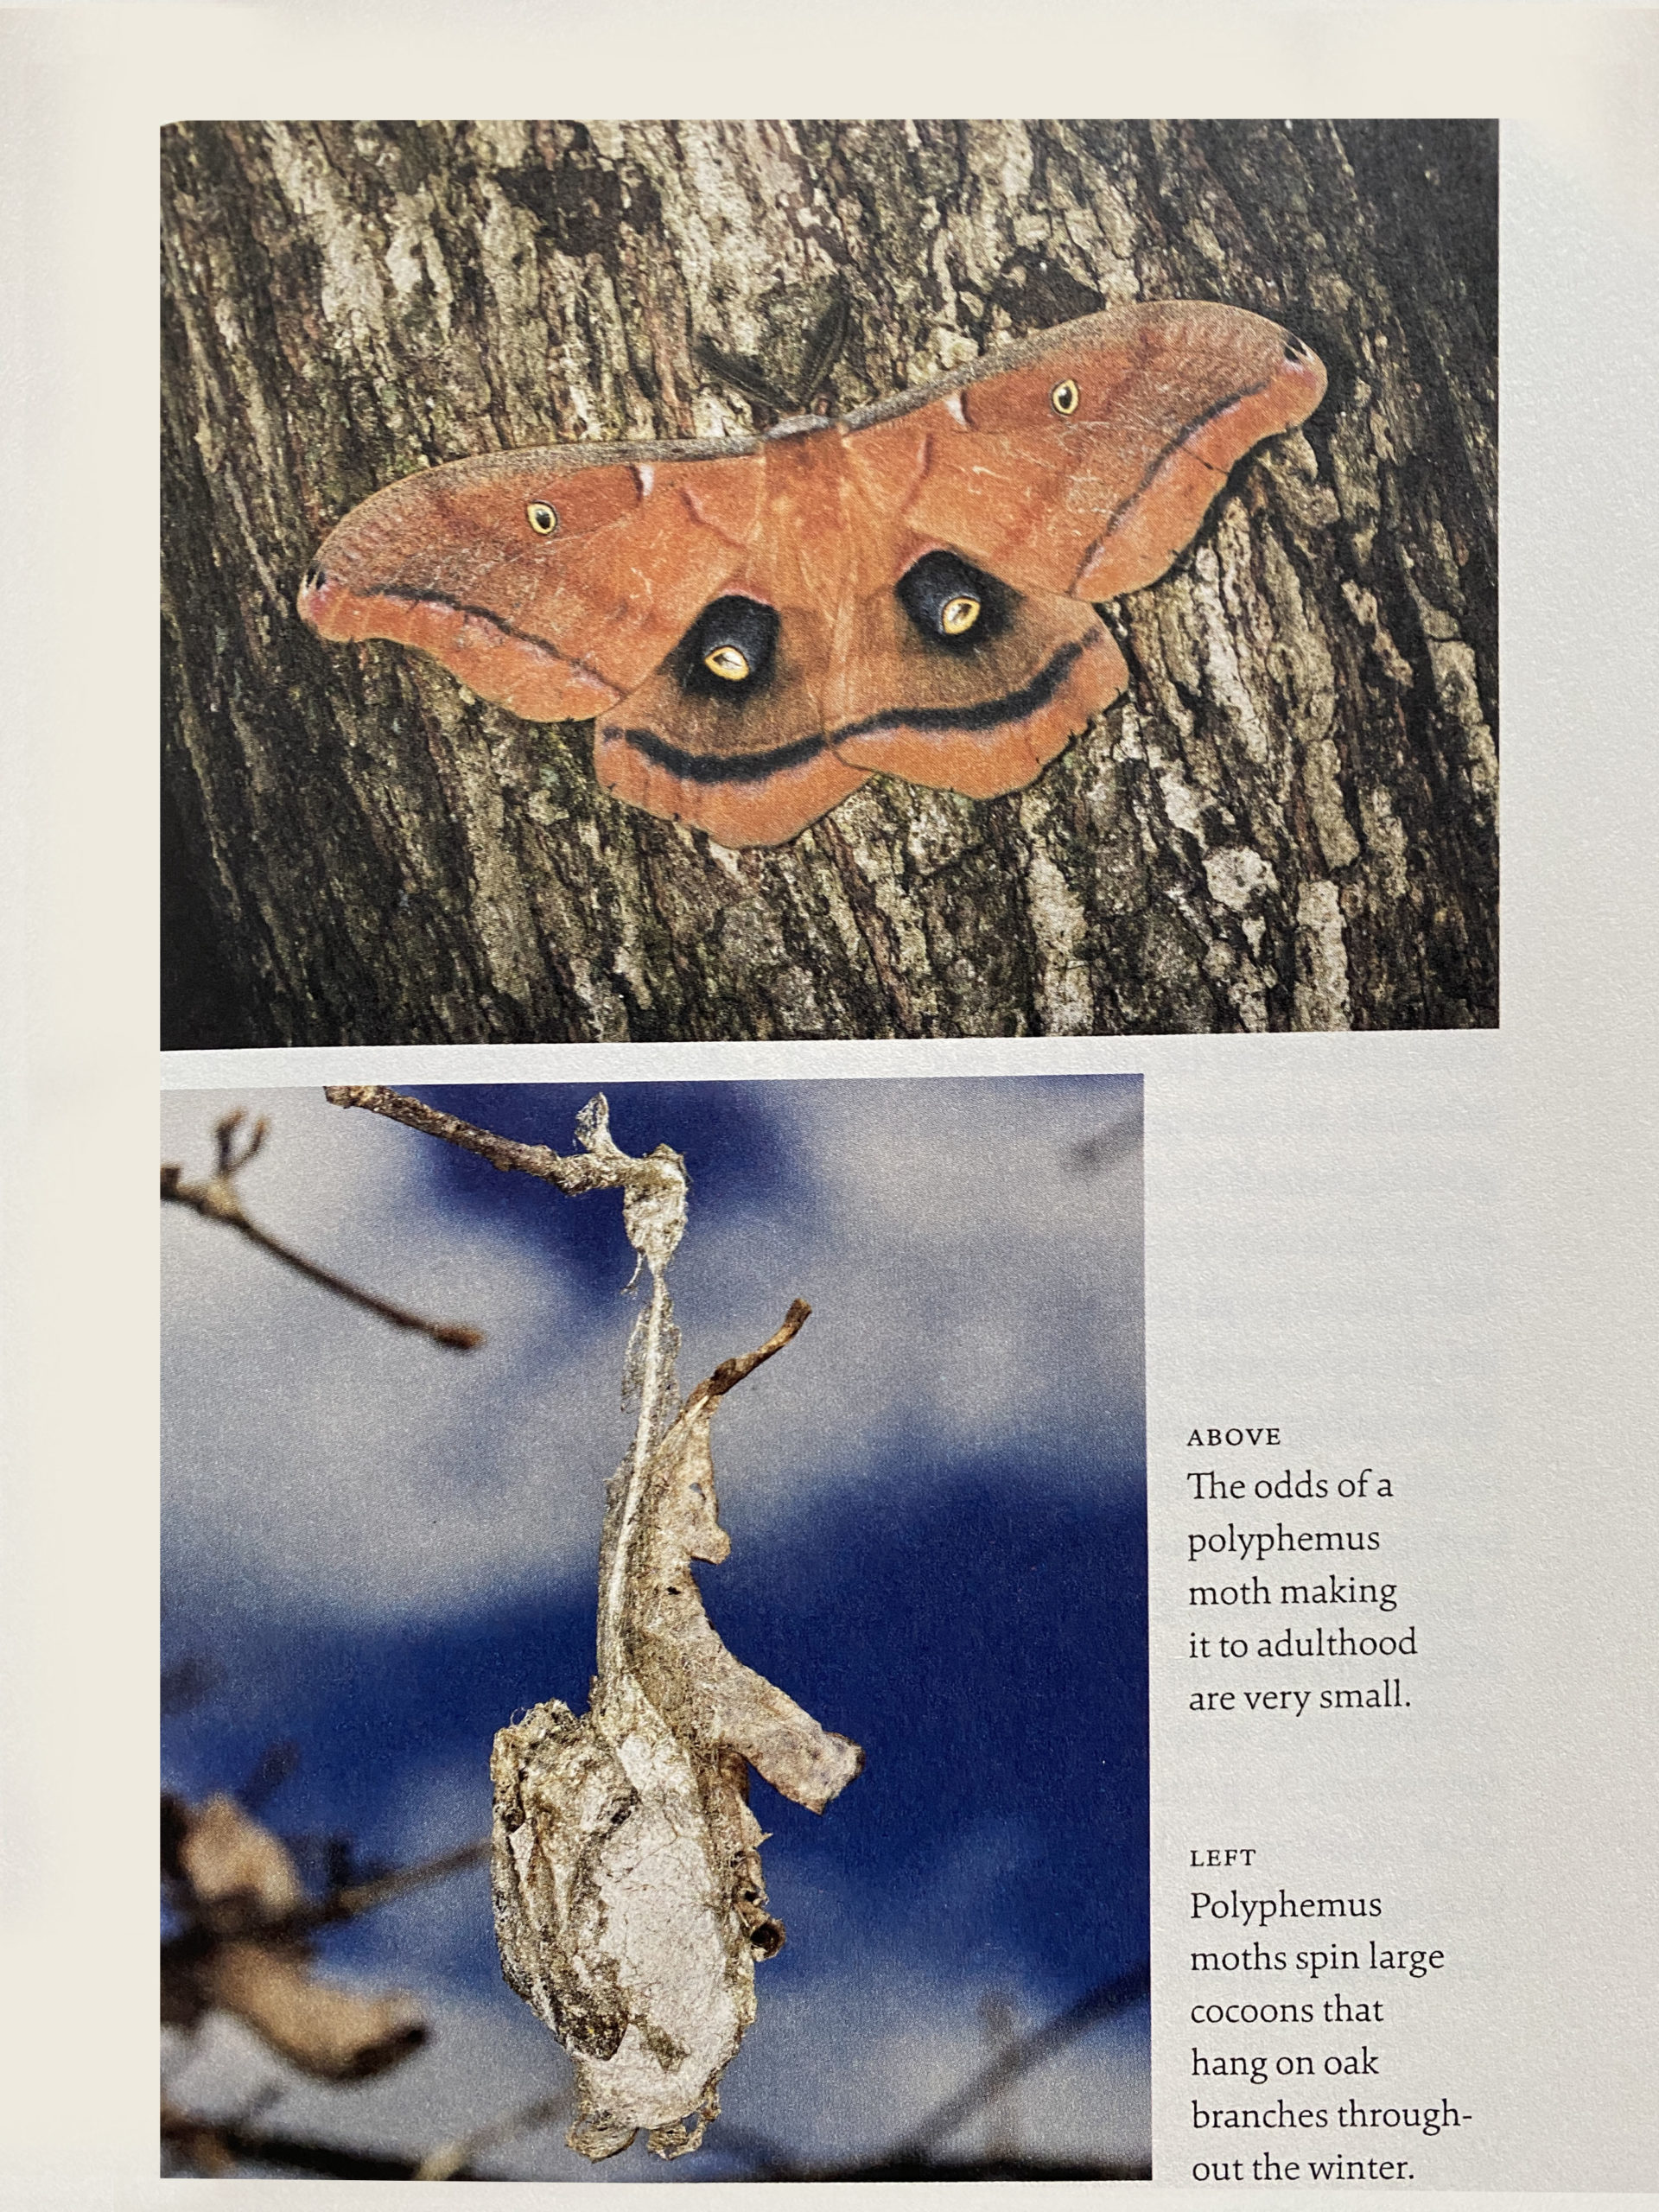 Polyphemus moth and cocoon.